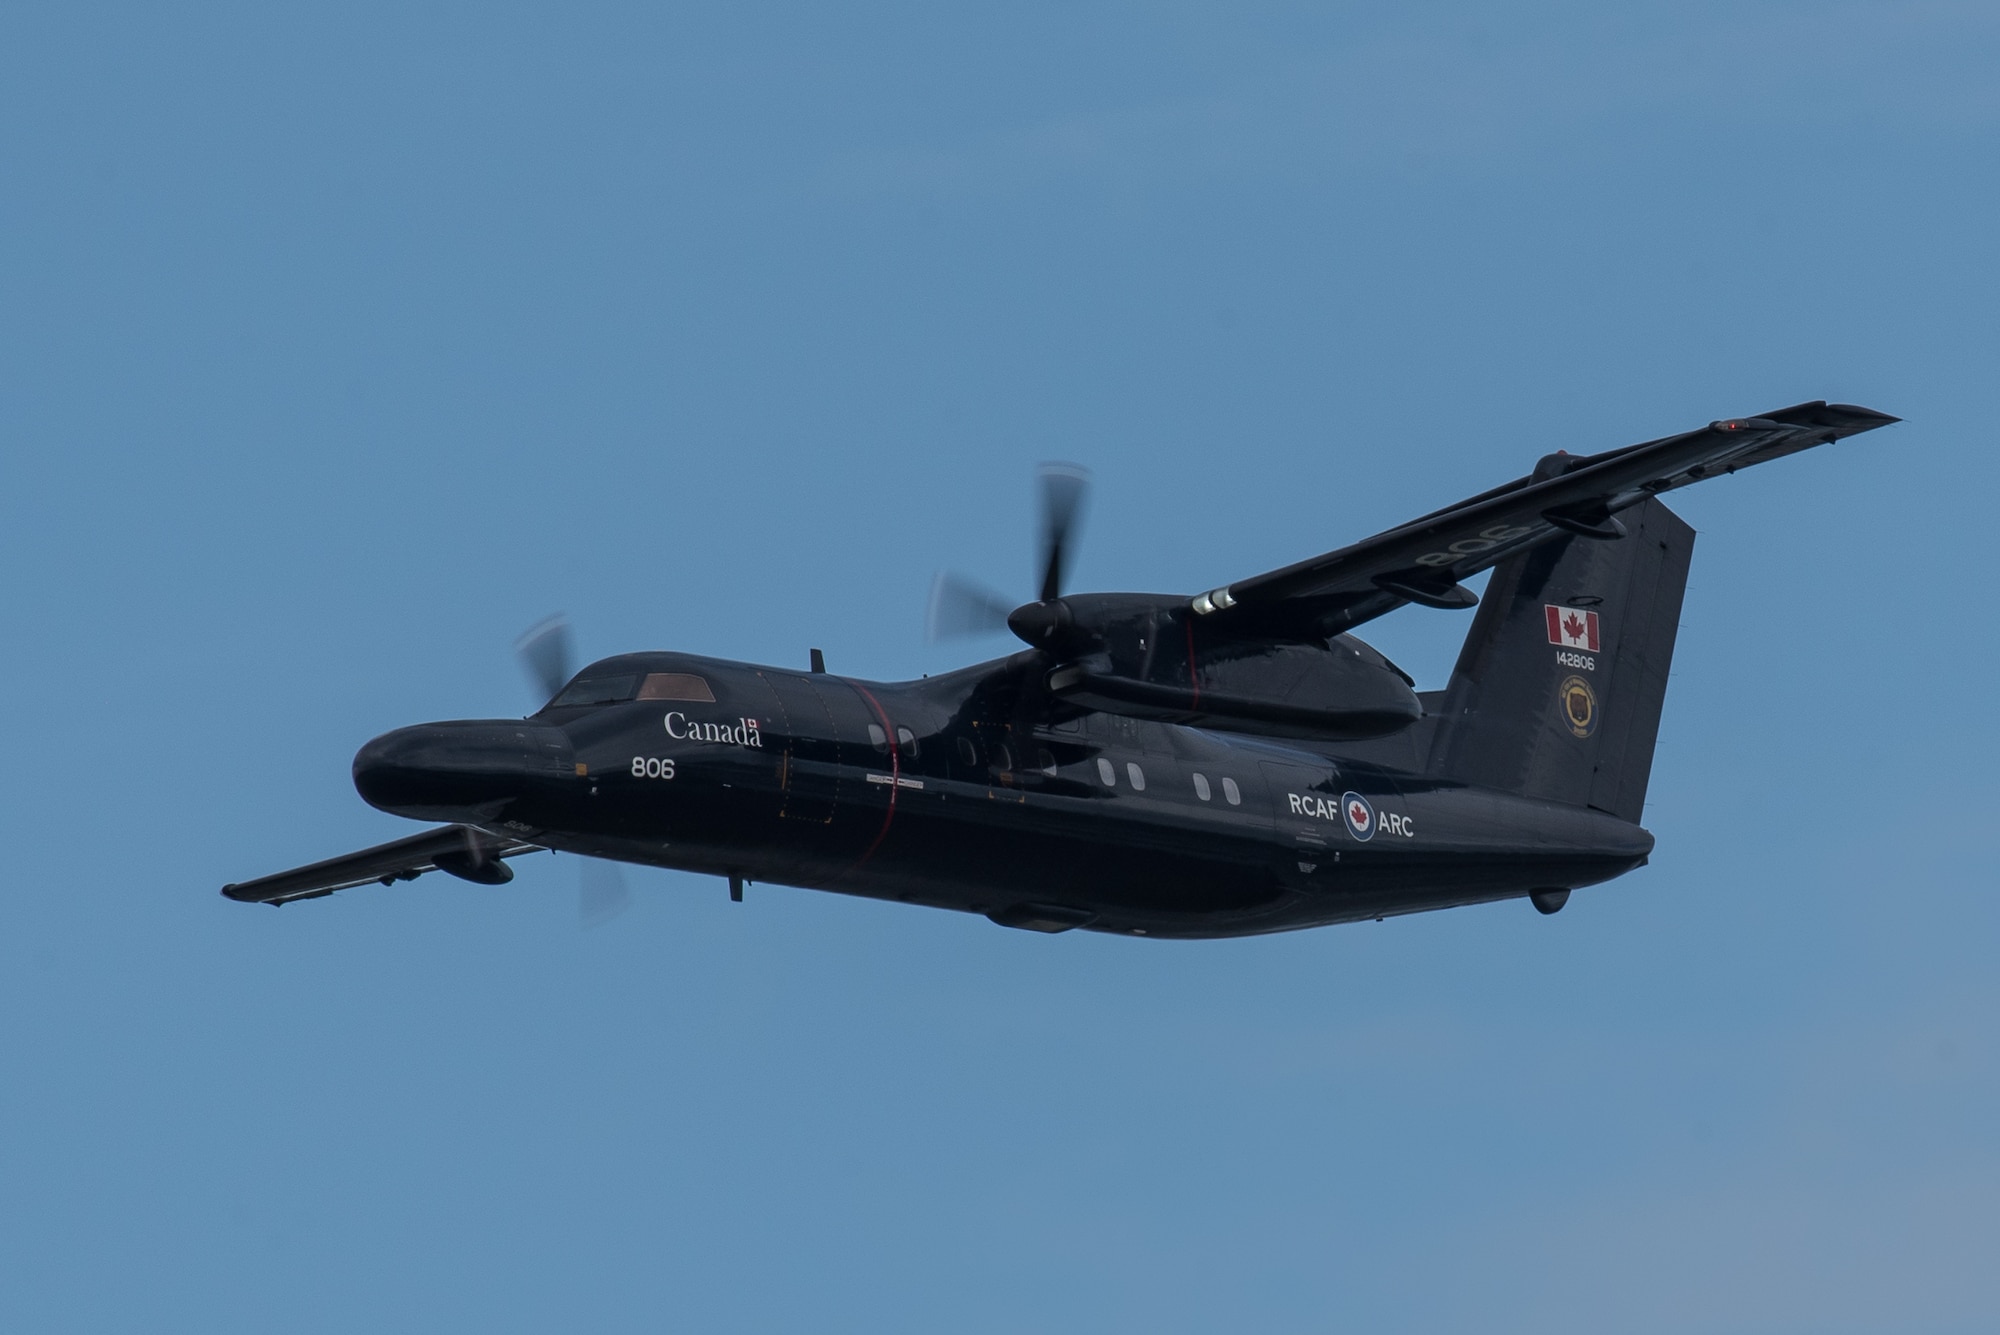 A CT-142 Gonzo from the Royal Canadian Air Force’s 402nd Squadron Squadron performs an aerial demonstration during the Thunder Over Louisville airshow in Louisville, Ky., April 13, 2019. The Kentucky Air National Guard once again served as the base of operations for military aircraft participating in the annual event, which has grown to become one of the largest single-day air shows in North America. (U.S. Air National Guard photo by Dale Greer)